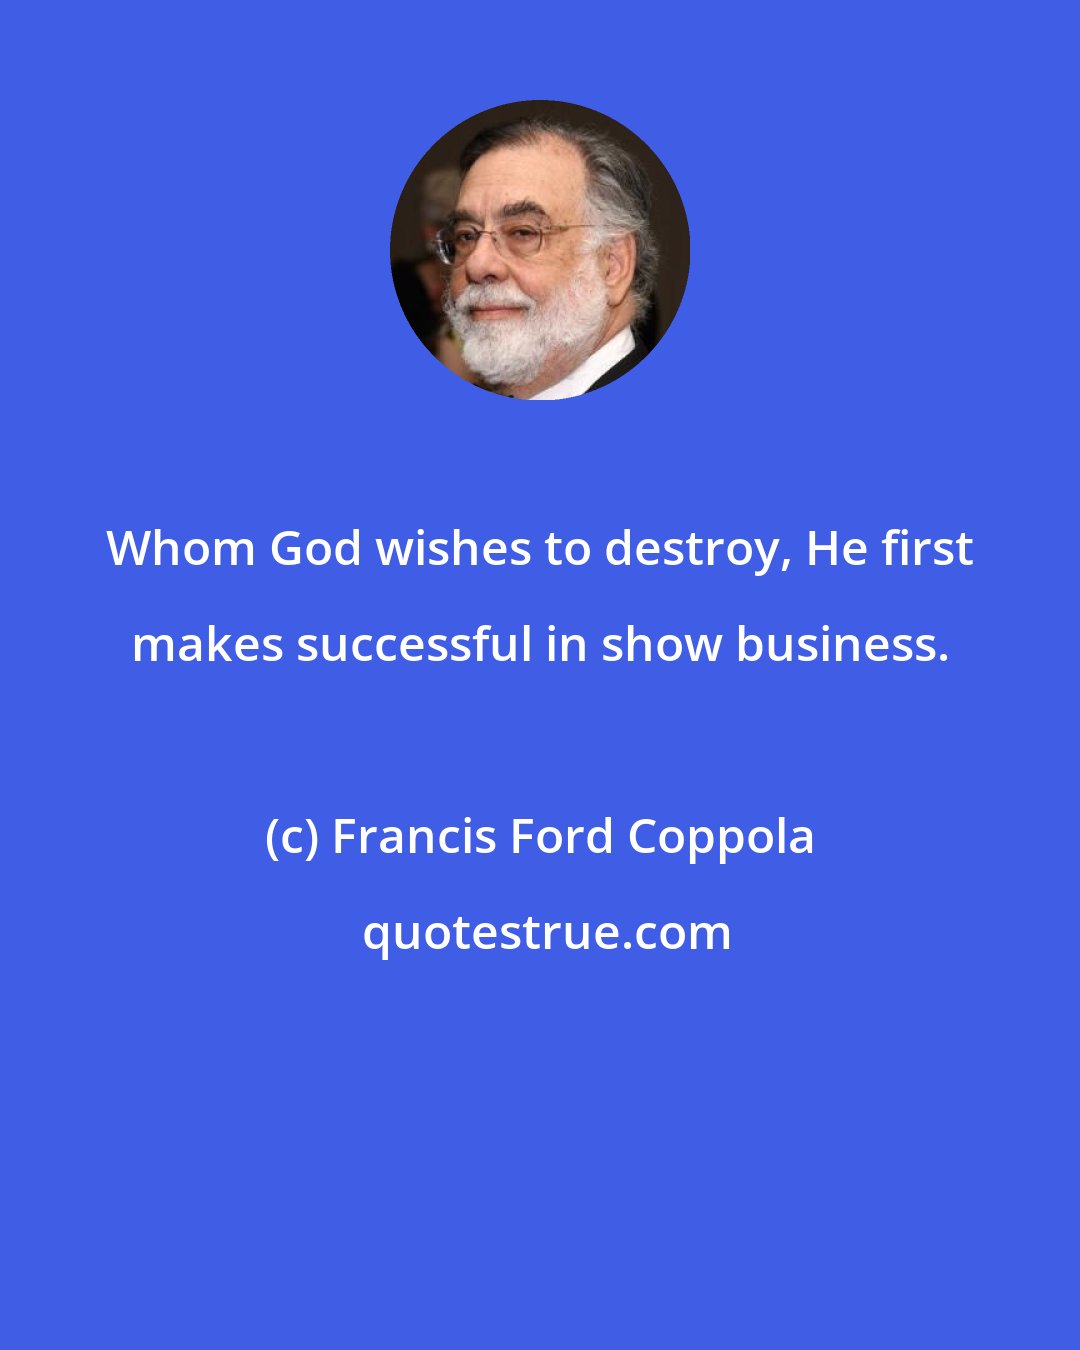 Francis Ford Coppola: Whom God wishes to destroy, He first makes successful in show business.